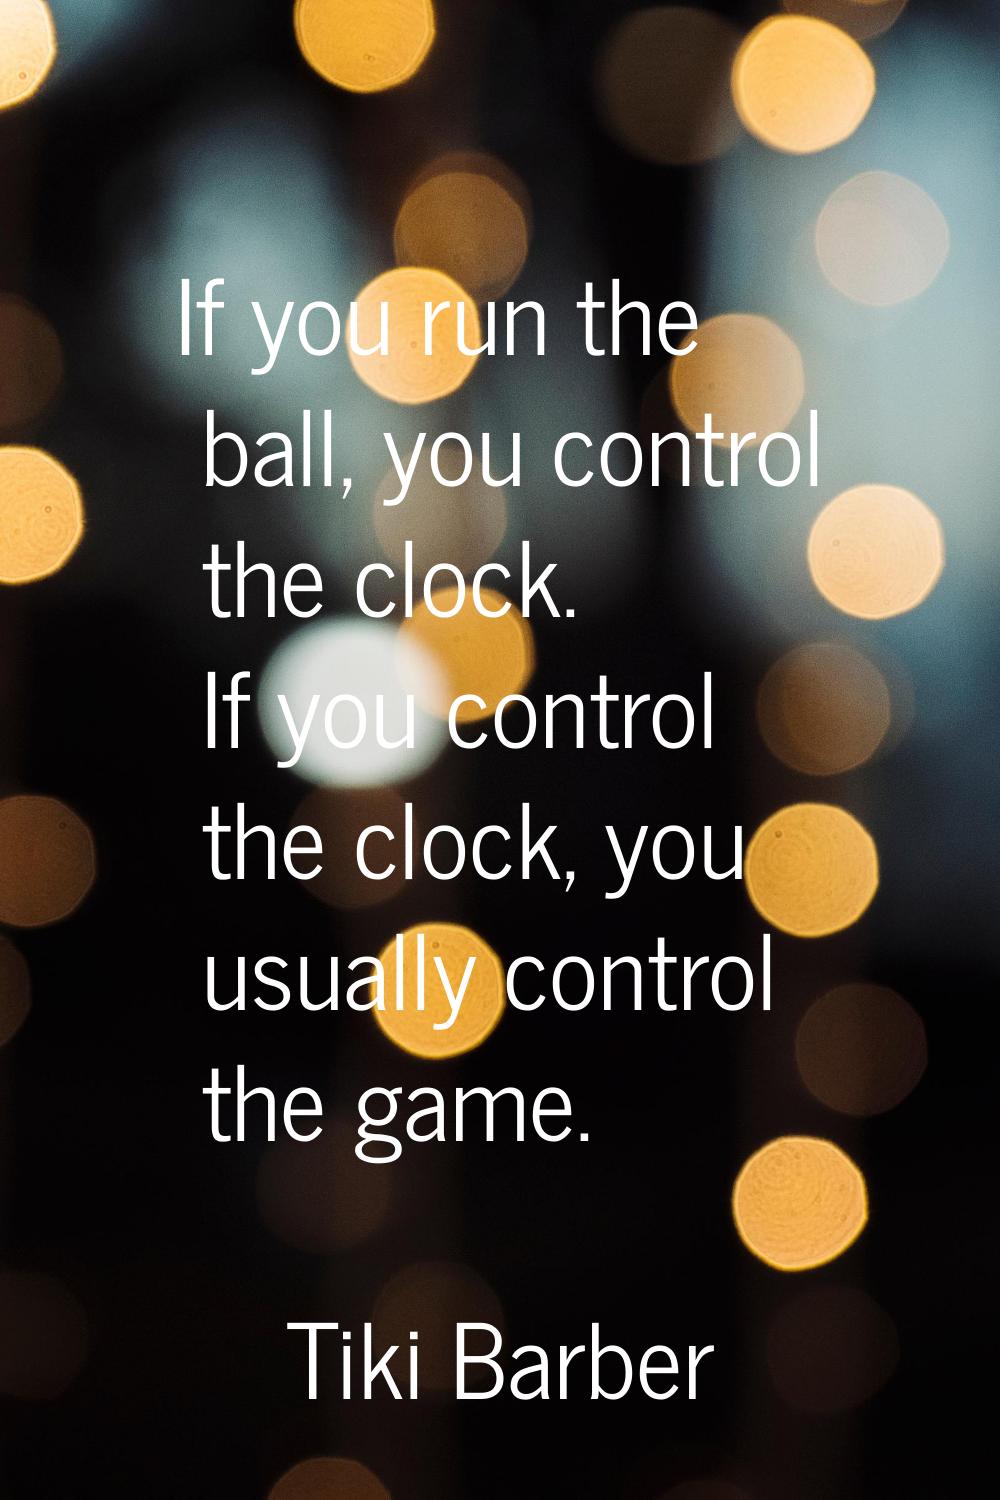 If you run the ball, you control the clock. If you control the clock, you usually control the game.